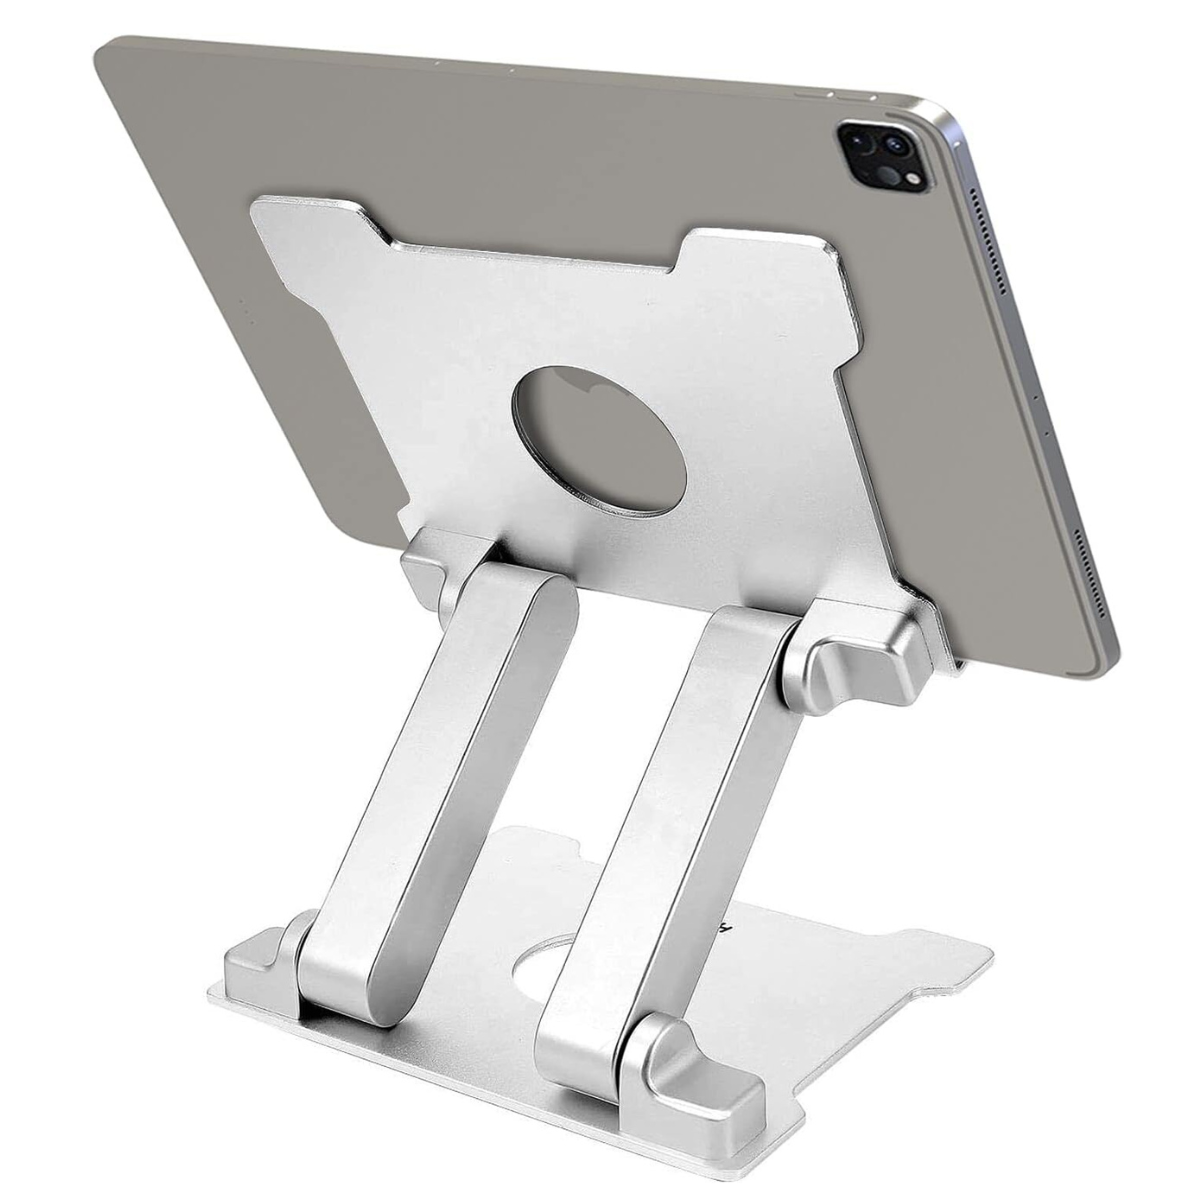 The Kabcon Quality Tablet Stand.